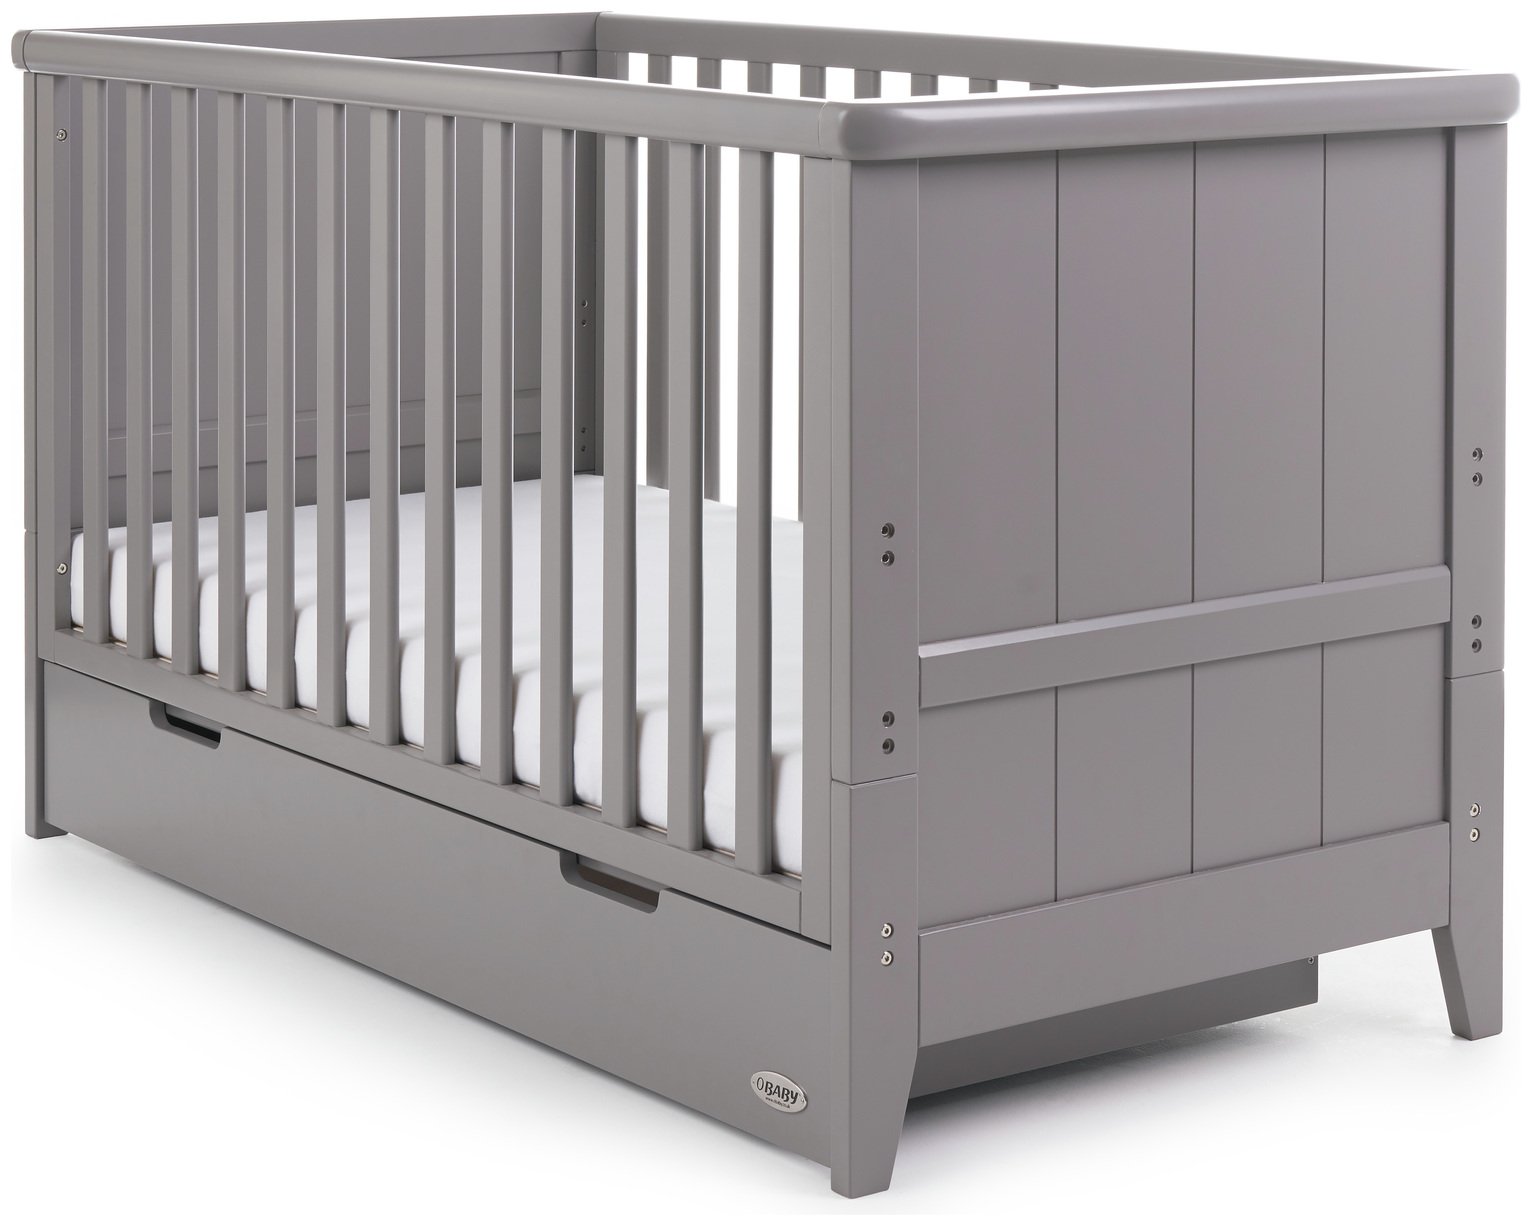 Obaby Belton Cot Bed - Taupe Grey